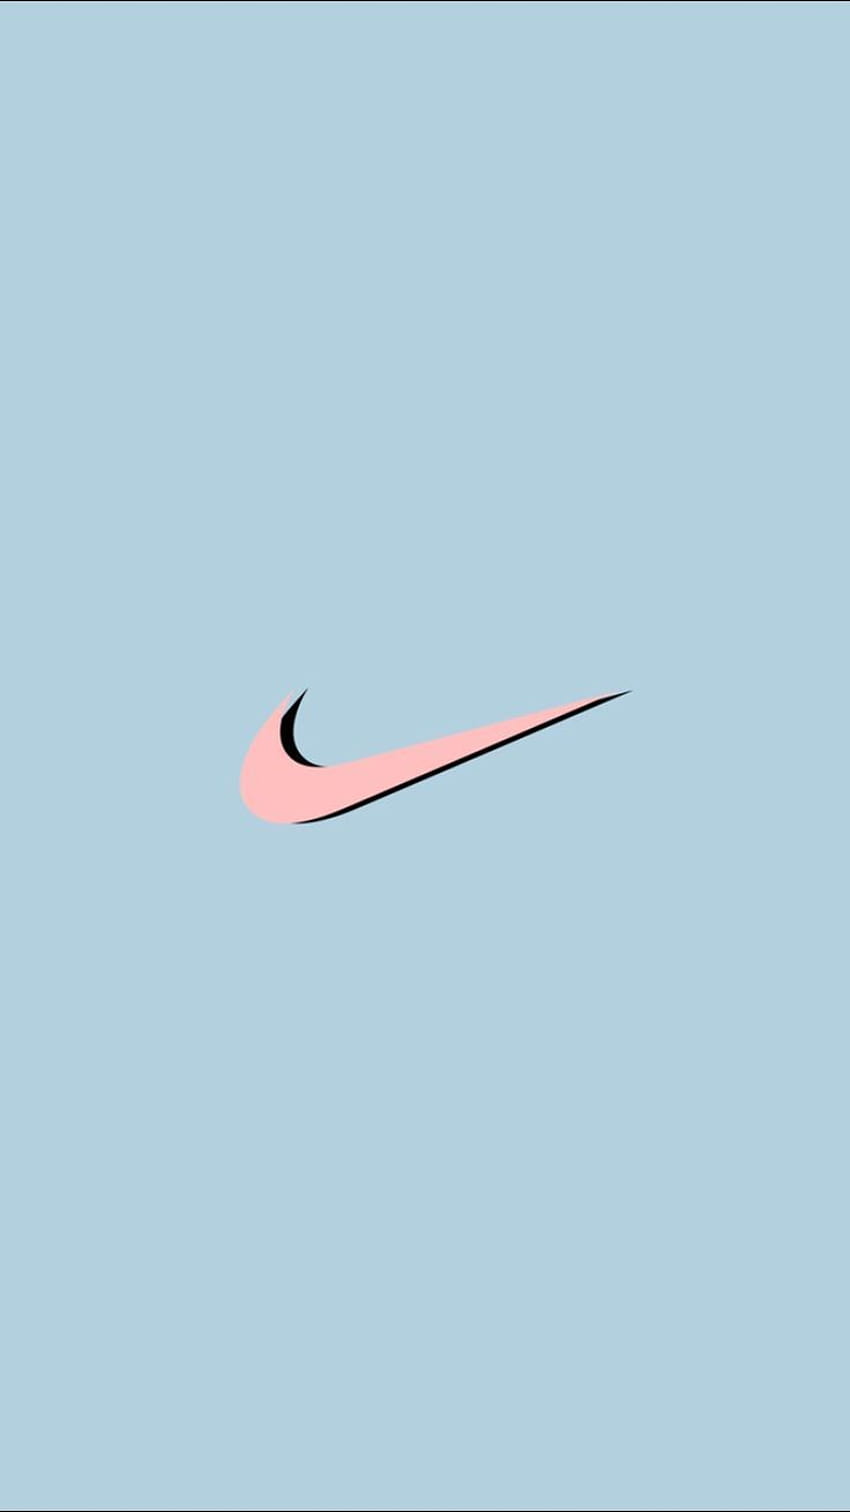 Nike wallpaper for your phone or desktop background. - Nike